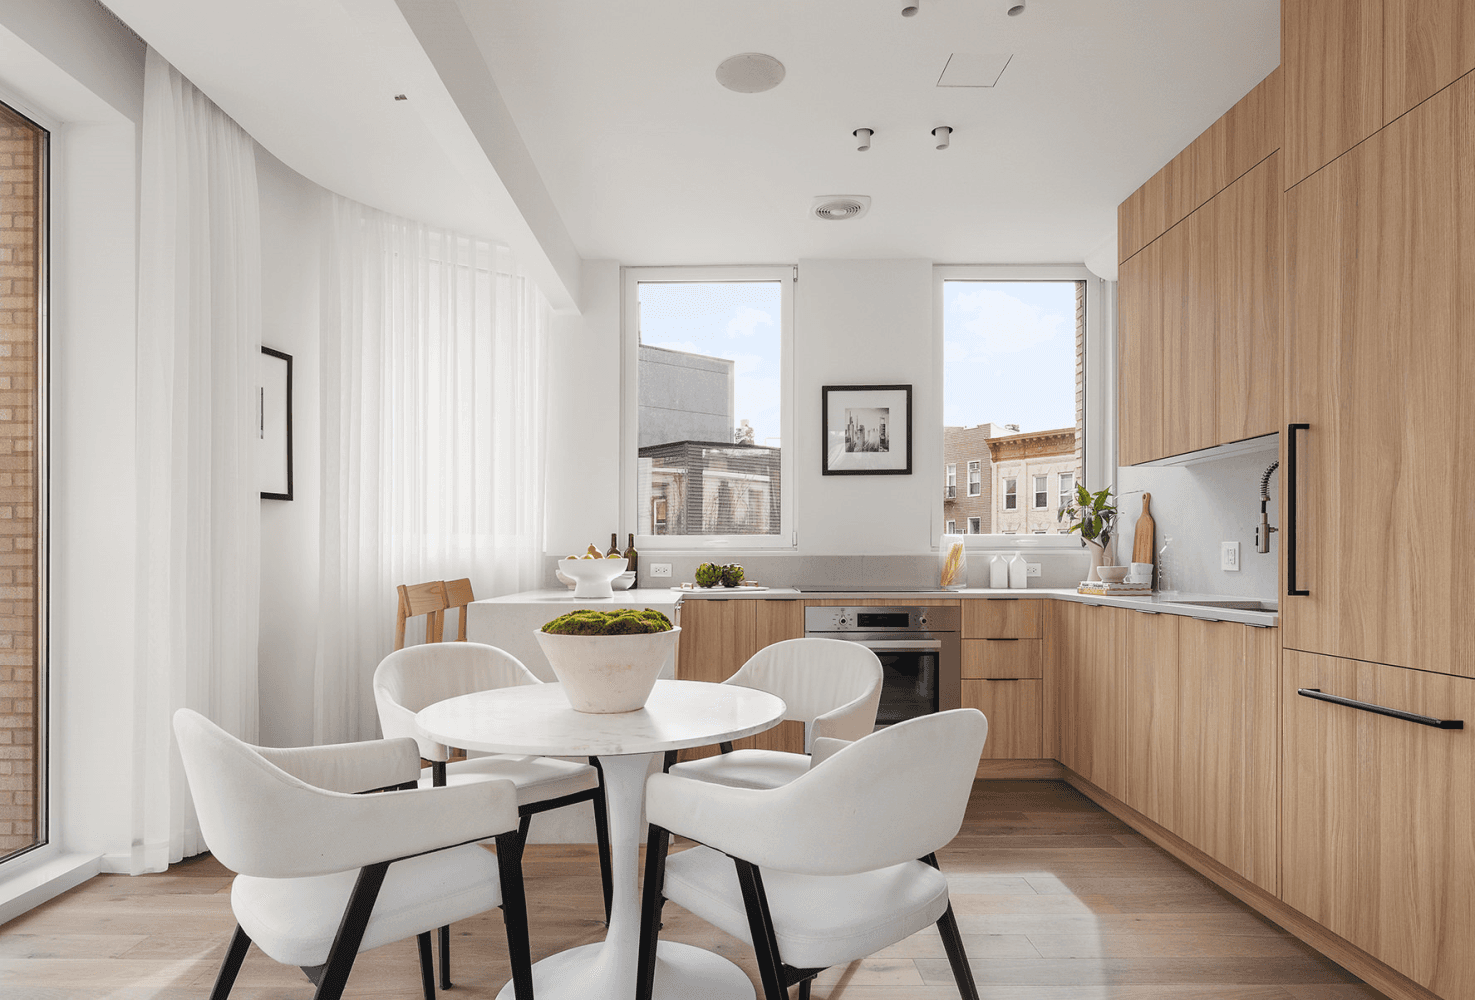 Welcome to this exquisite full floor condo with 3 bedrooms, 2 bathrooms, and a private terrace at The Woodpoint in Williamsburg.